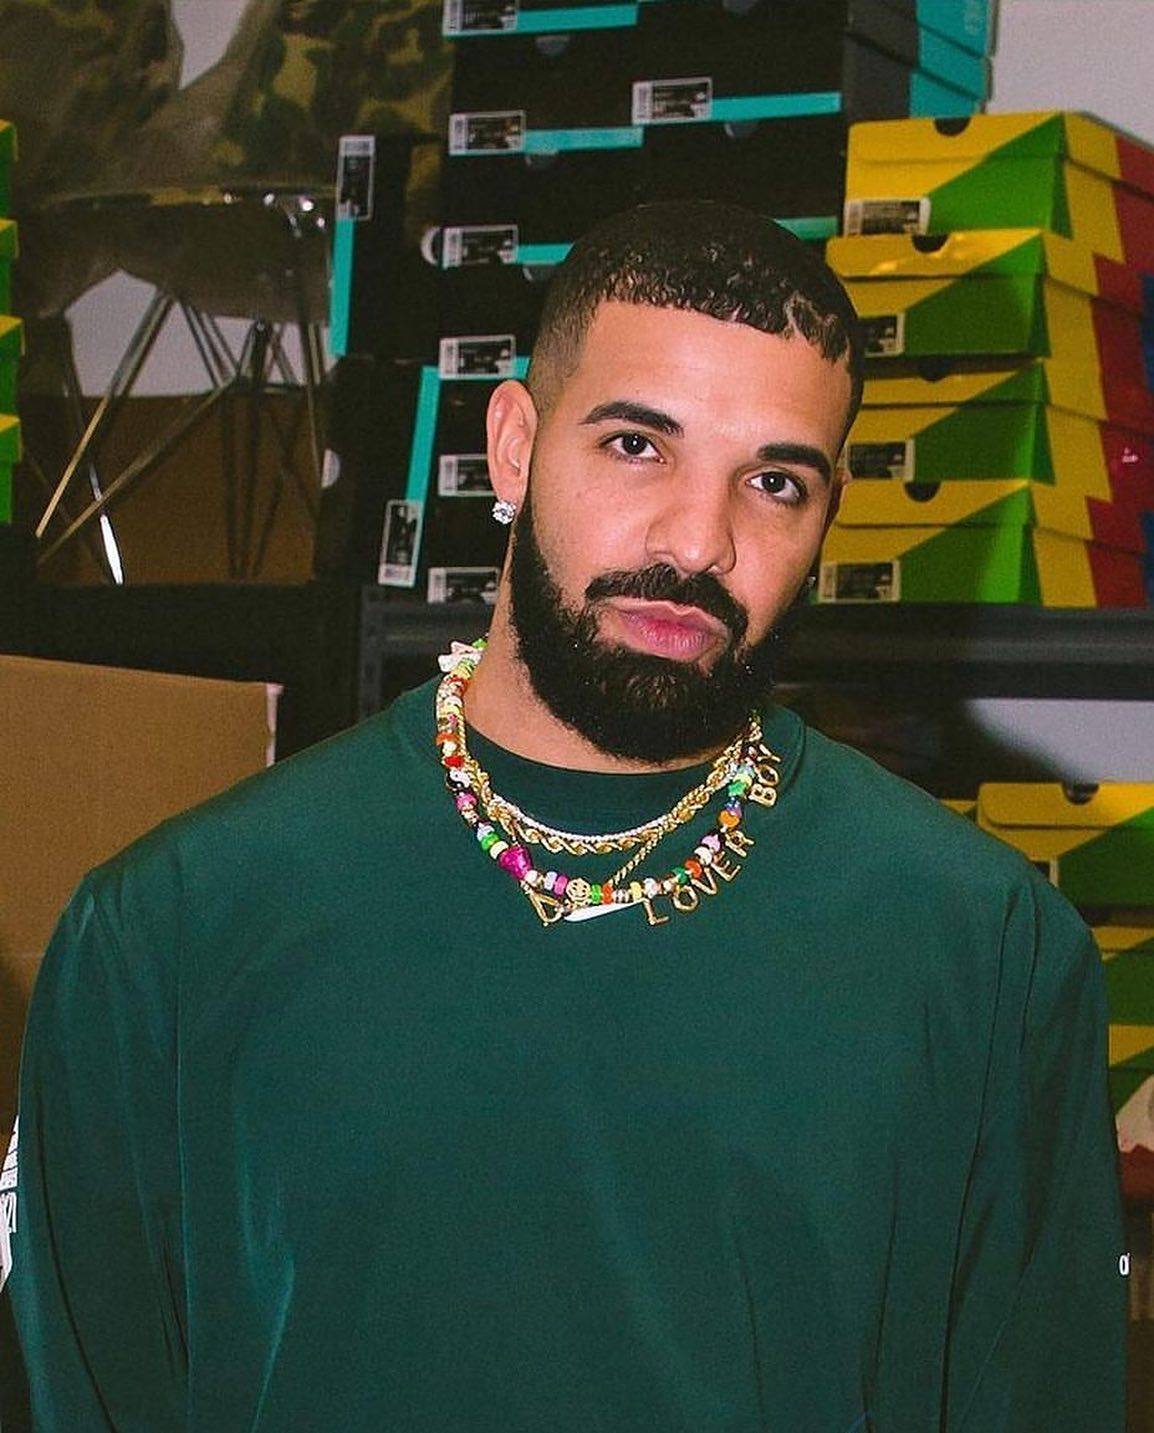 Drake is a Canadian record-breaking rapper. Photo: @drakeofficlal/Instagram